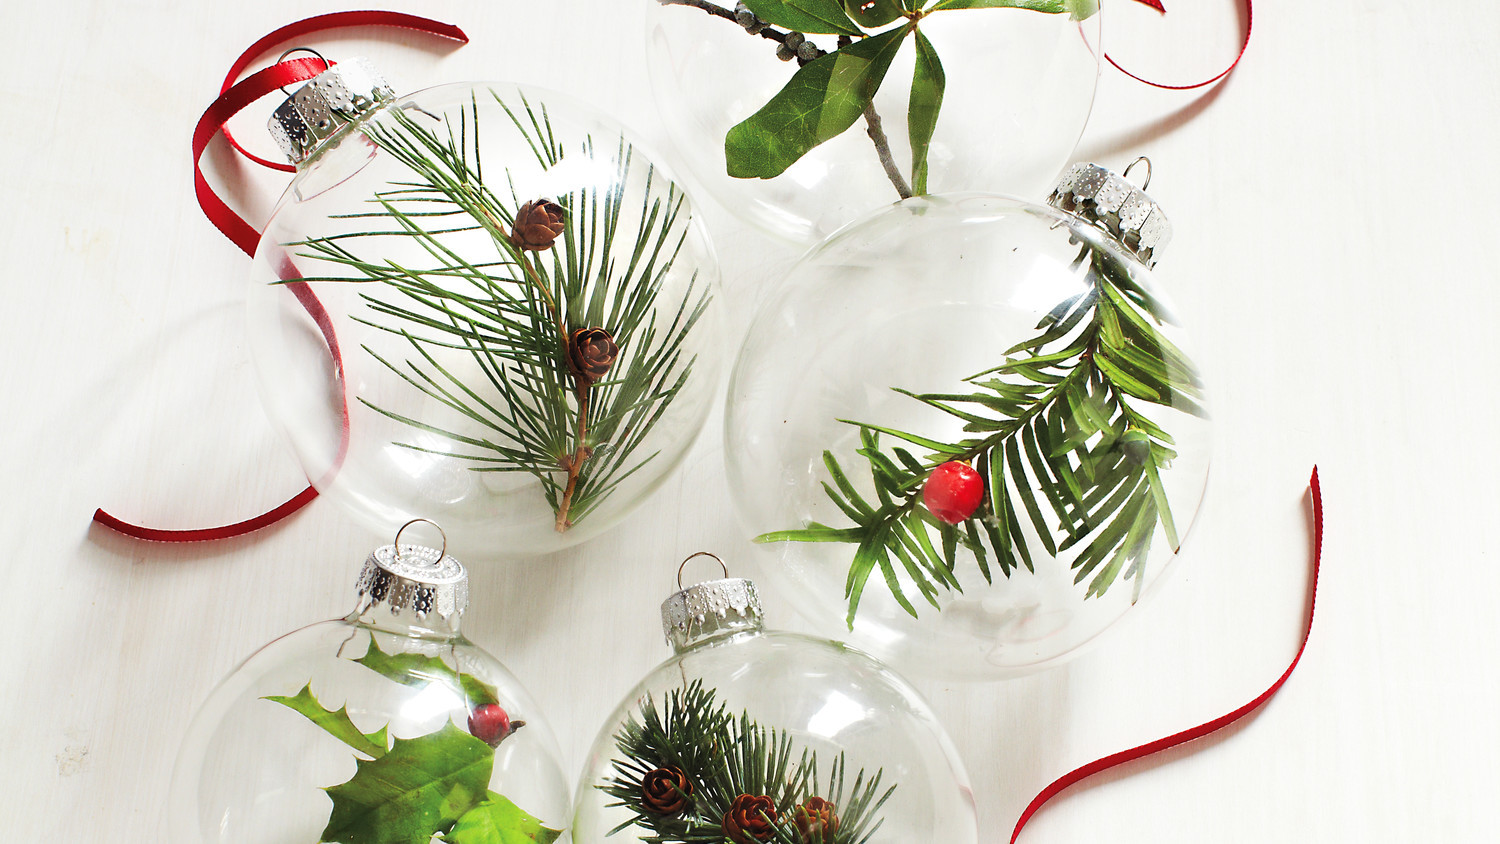 DIY Christmas Tree Ornament
 20 of Our Most Memorable DIY Christmas Ornament Projects